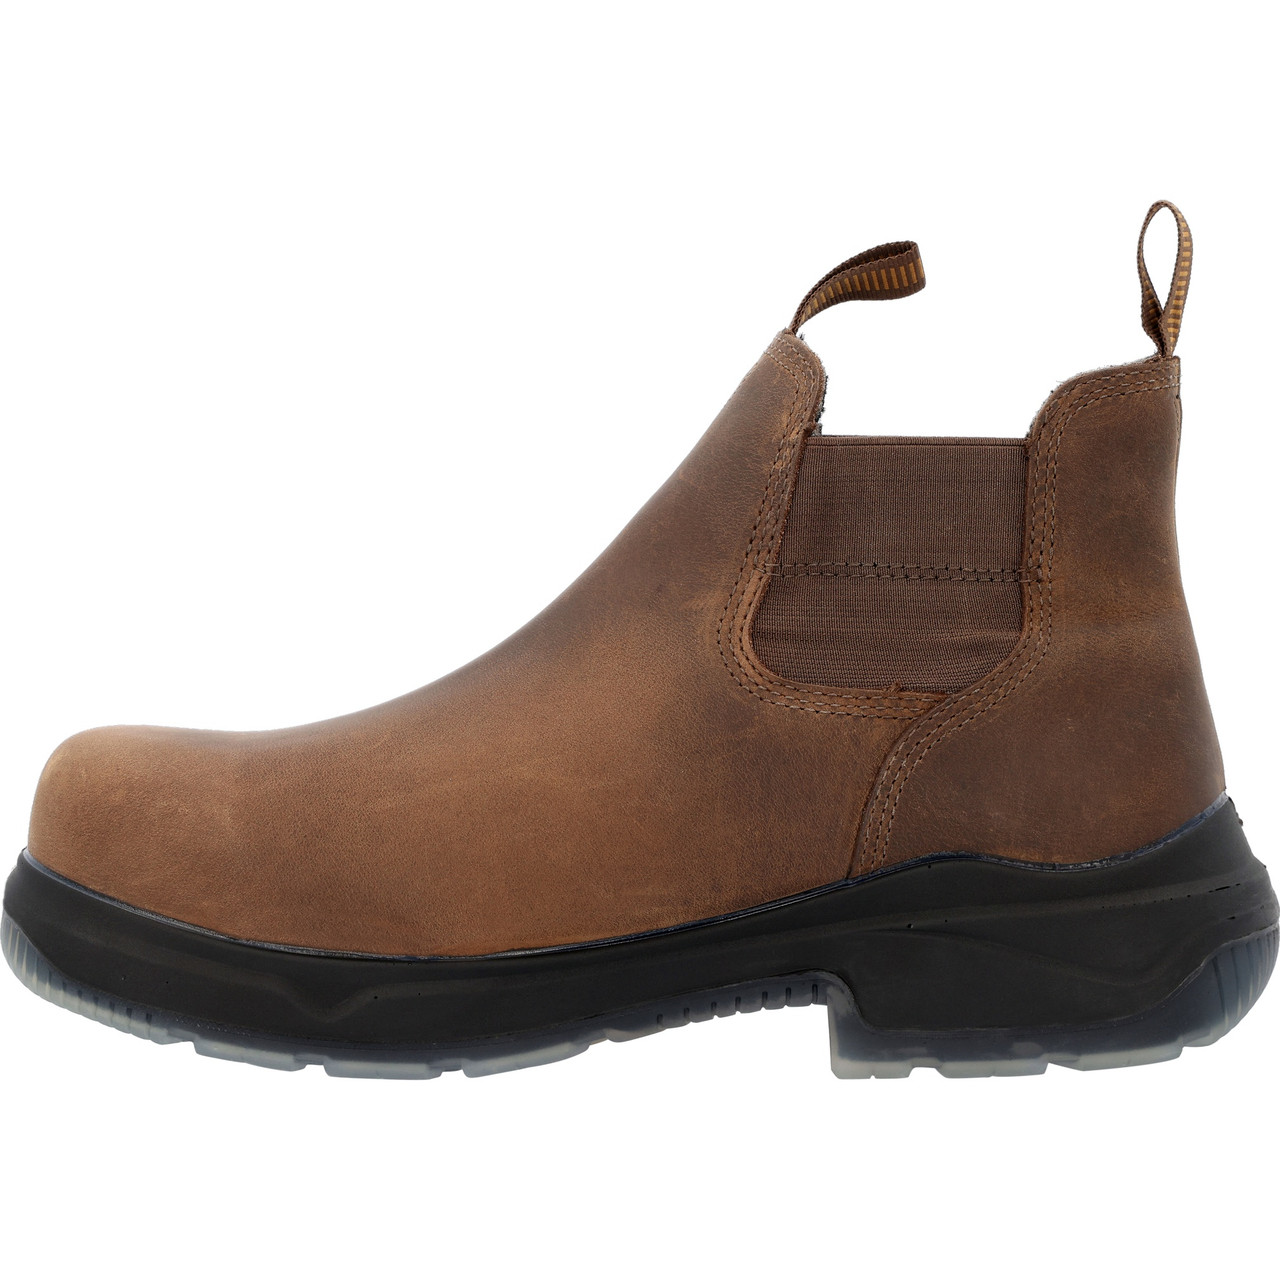 GEORGIA FLXPOINT ULTRA COMPOSITE TOE WATERPROOF CHELSEA BOOTS GB00553